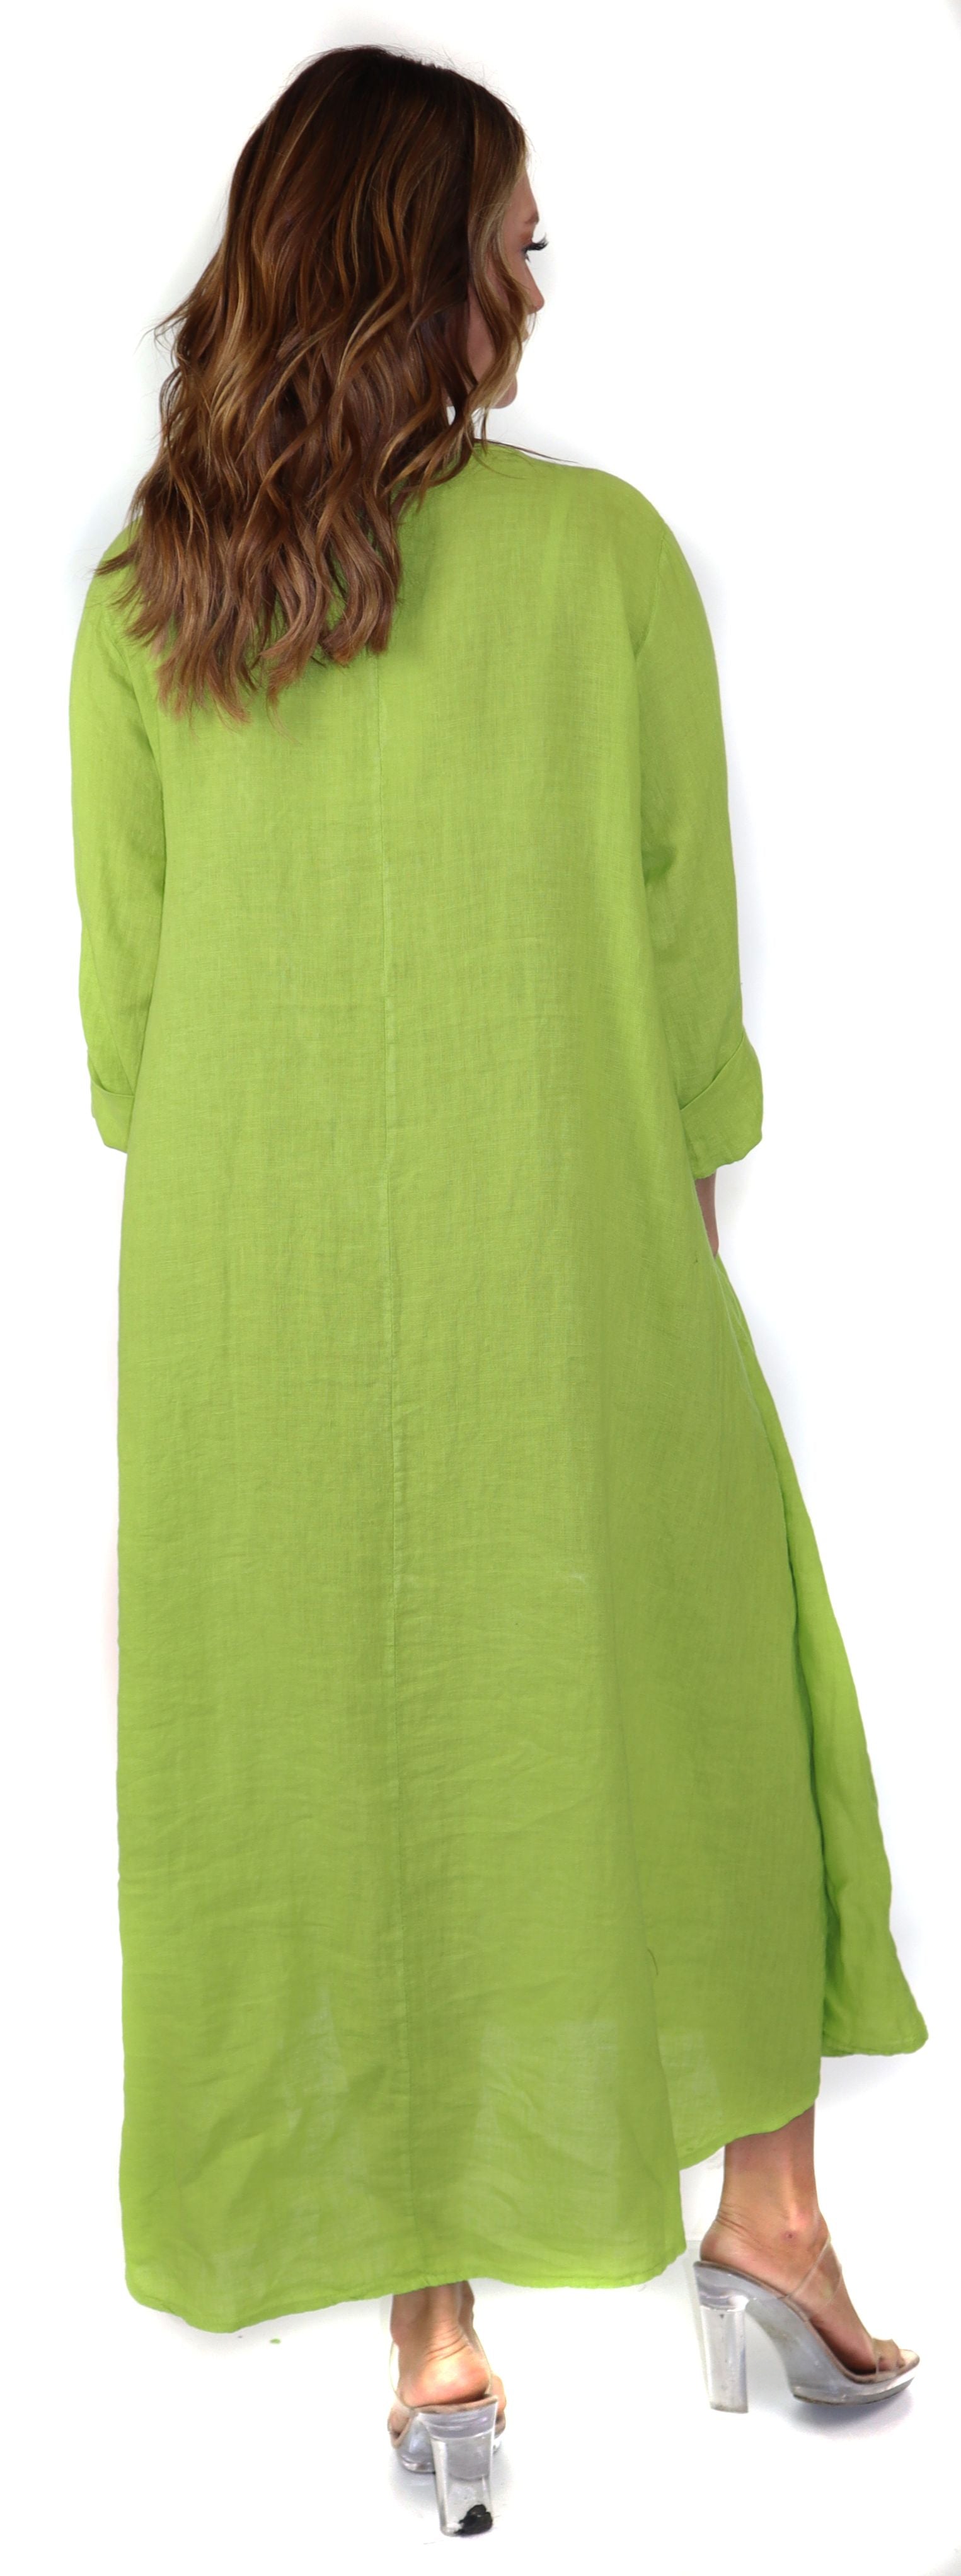 Lime Green Washed Linen Dress